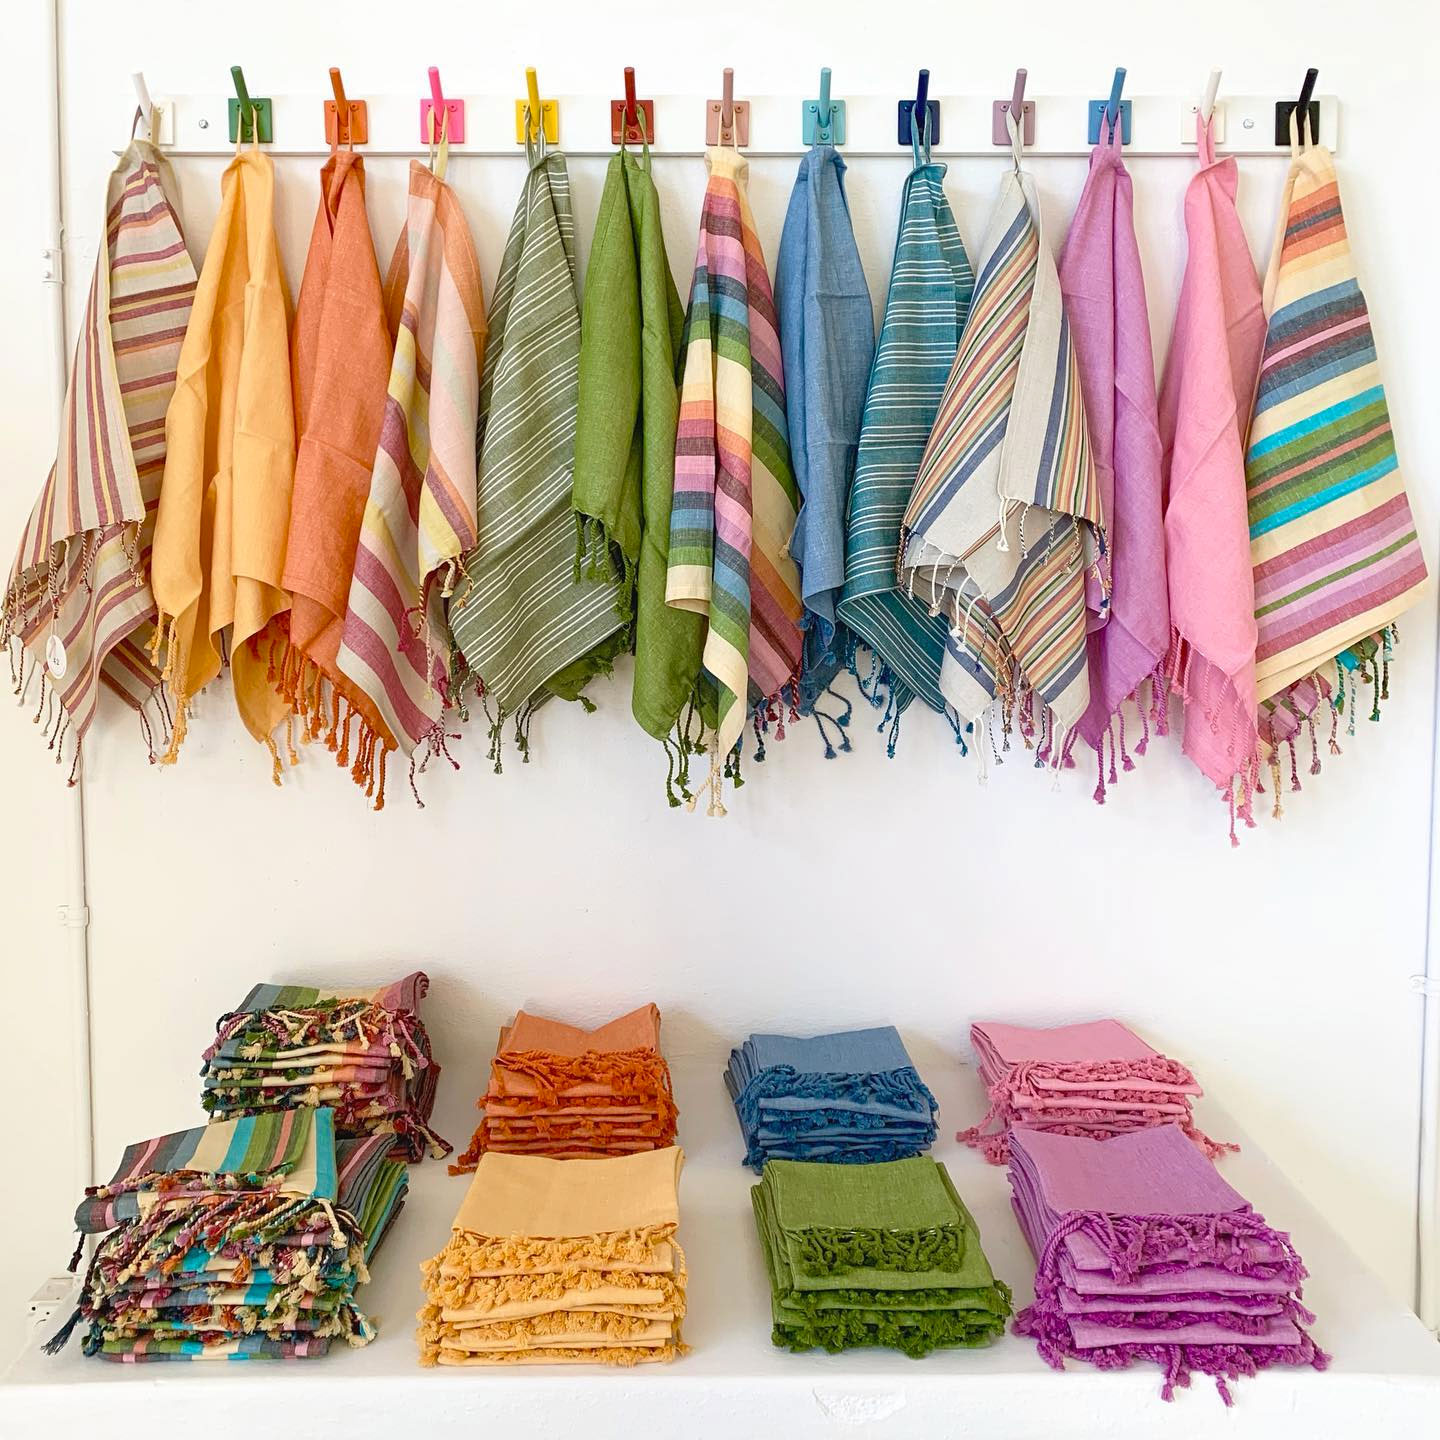 Colorful striped linens from Garza Marfa